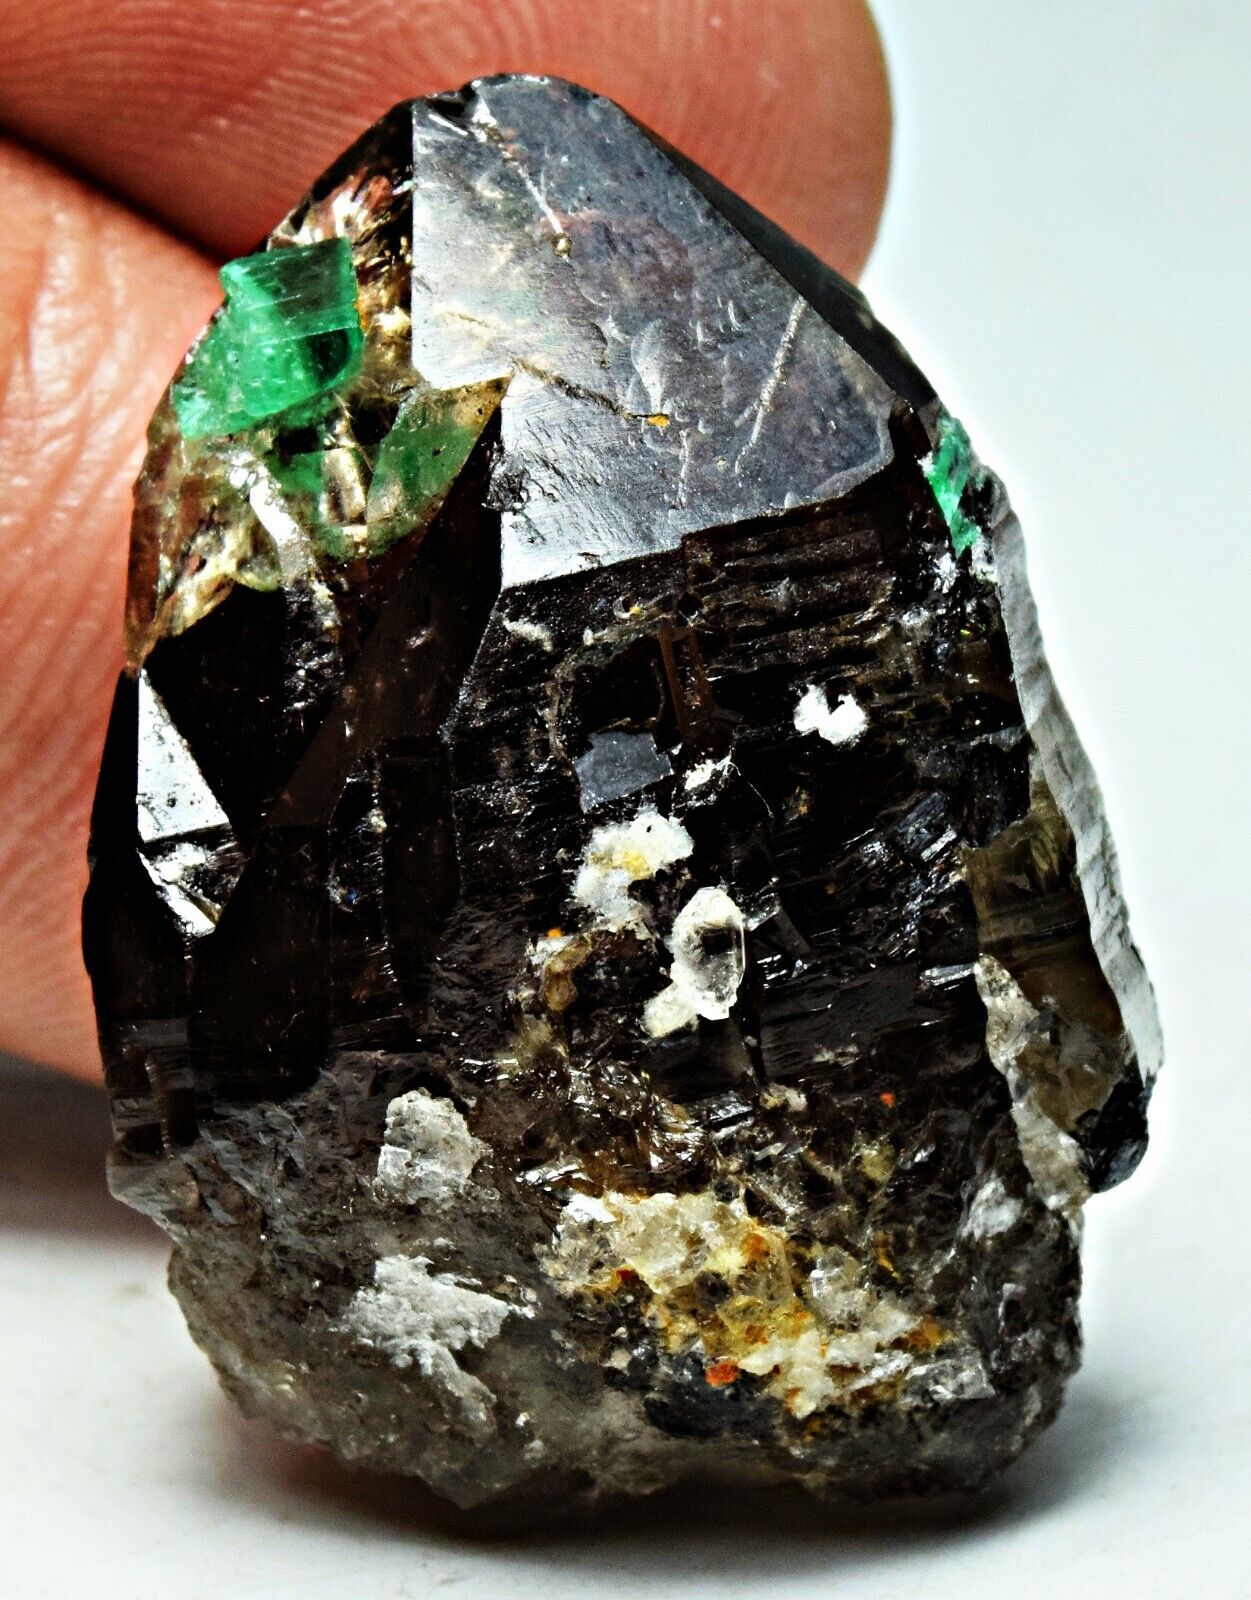 62 Carat Green Emerald Crystal Specimen With Smoky Quartz From Panjsher Afghanis